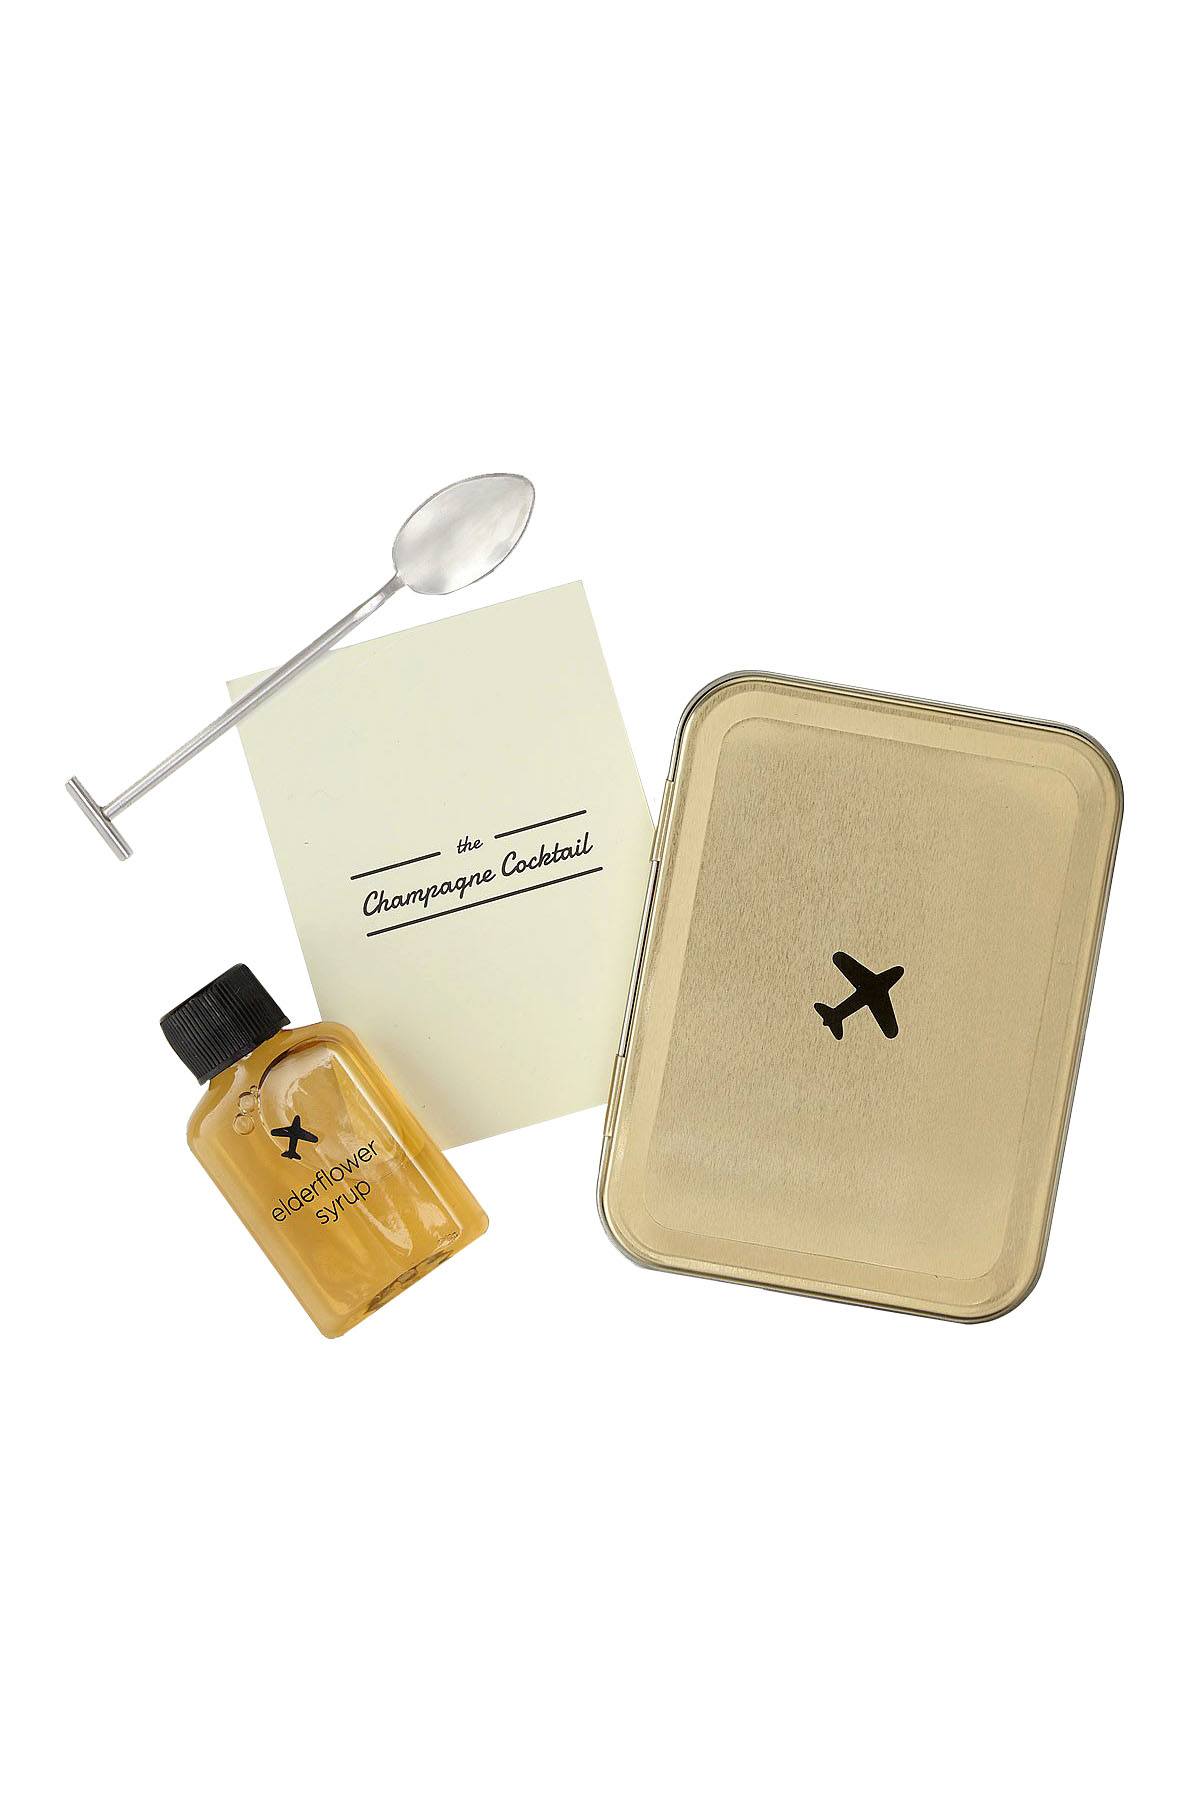 WP Design The Carry On Champagne Cocktail Kit